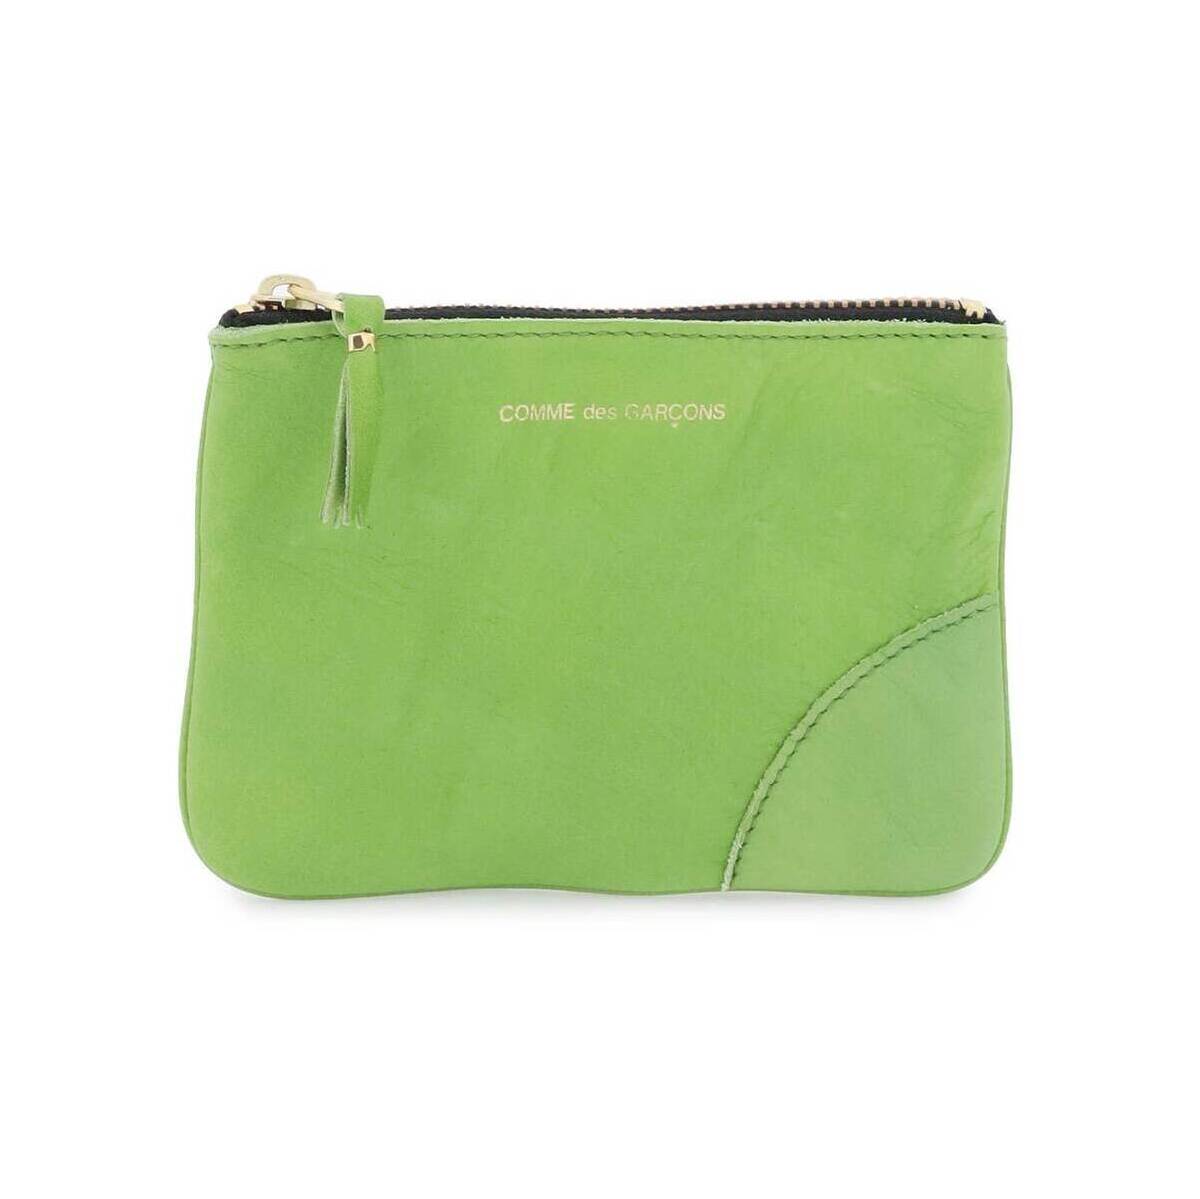 COMME DES GARCONS コム デ ギャルソン グリーン Verde Comme des garcons wallet leather coin purse ファッション小物 メンズ 秋冬2023 SA8100WW 【関税・送料無料】【ラッピング無料】 ik